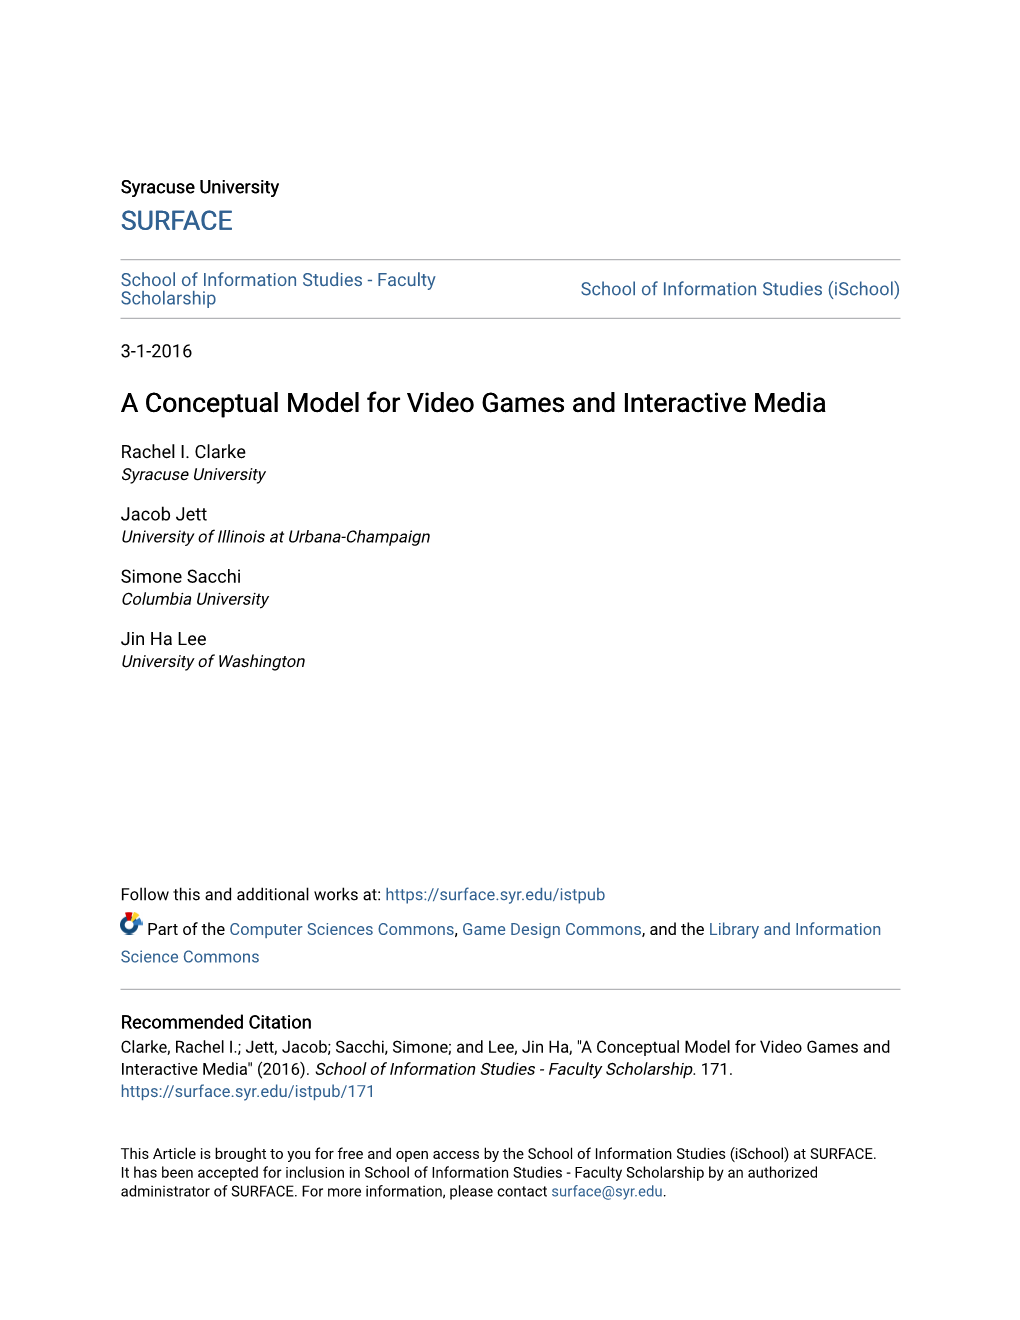 A Conceptual Model for Video Games and Interactive Media